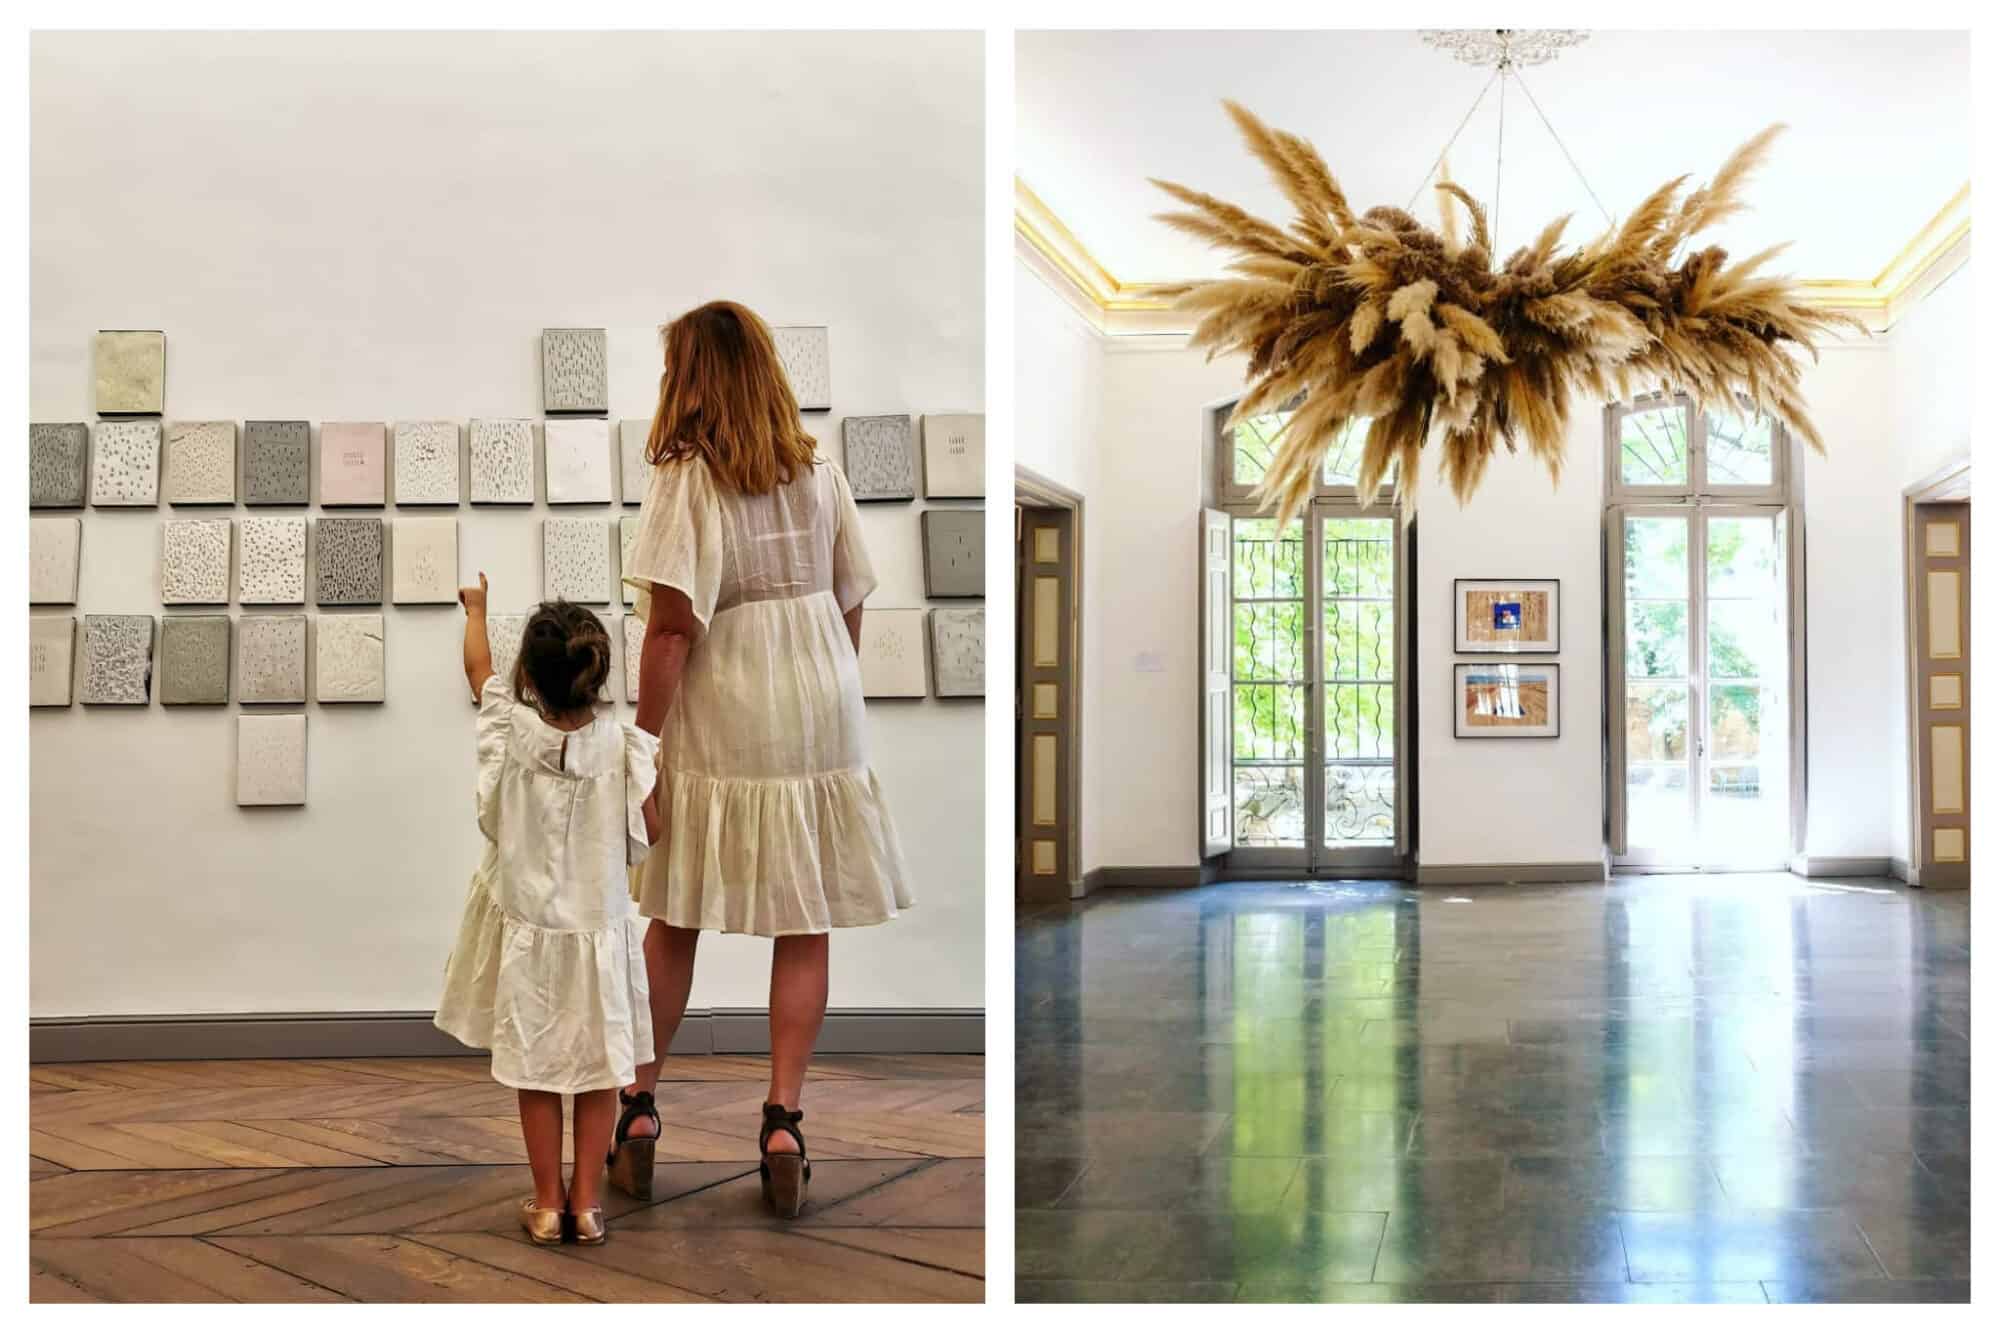 Left: A mother and daughter discuss art on display in the culture center at the Hôtel du Caumont, Right: A large, feathery art piece hangs from the ceiling at the Hôtel du Caumont 